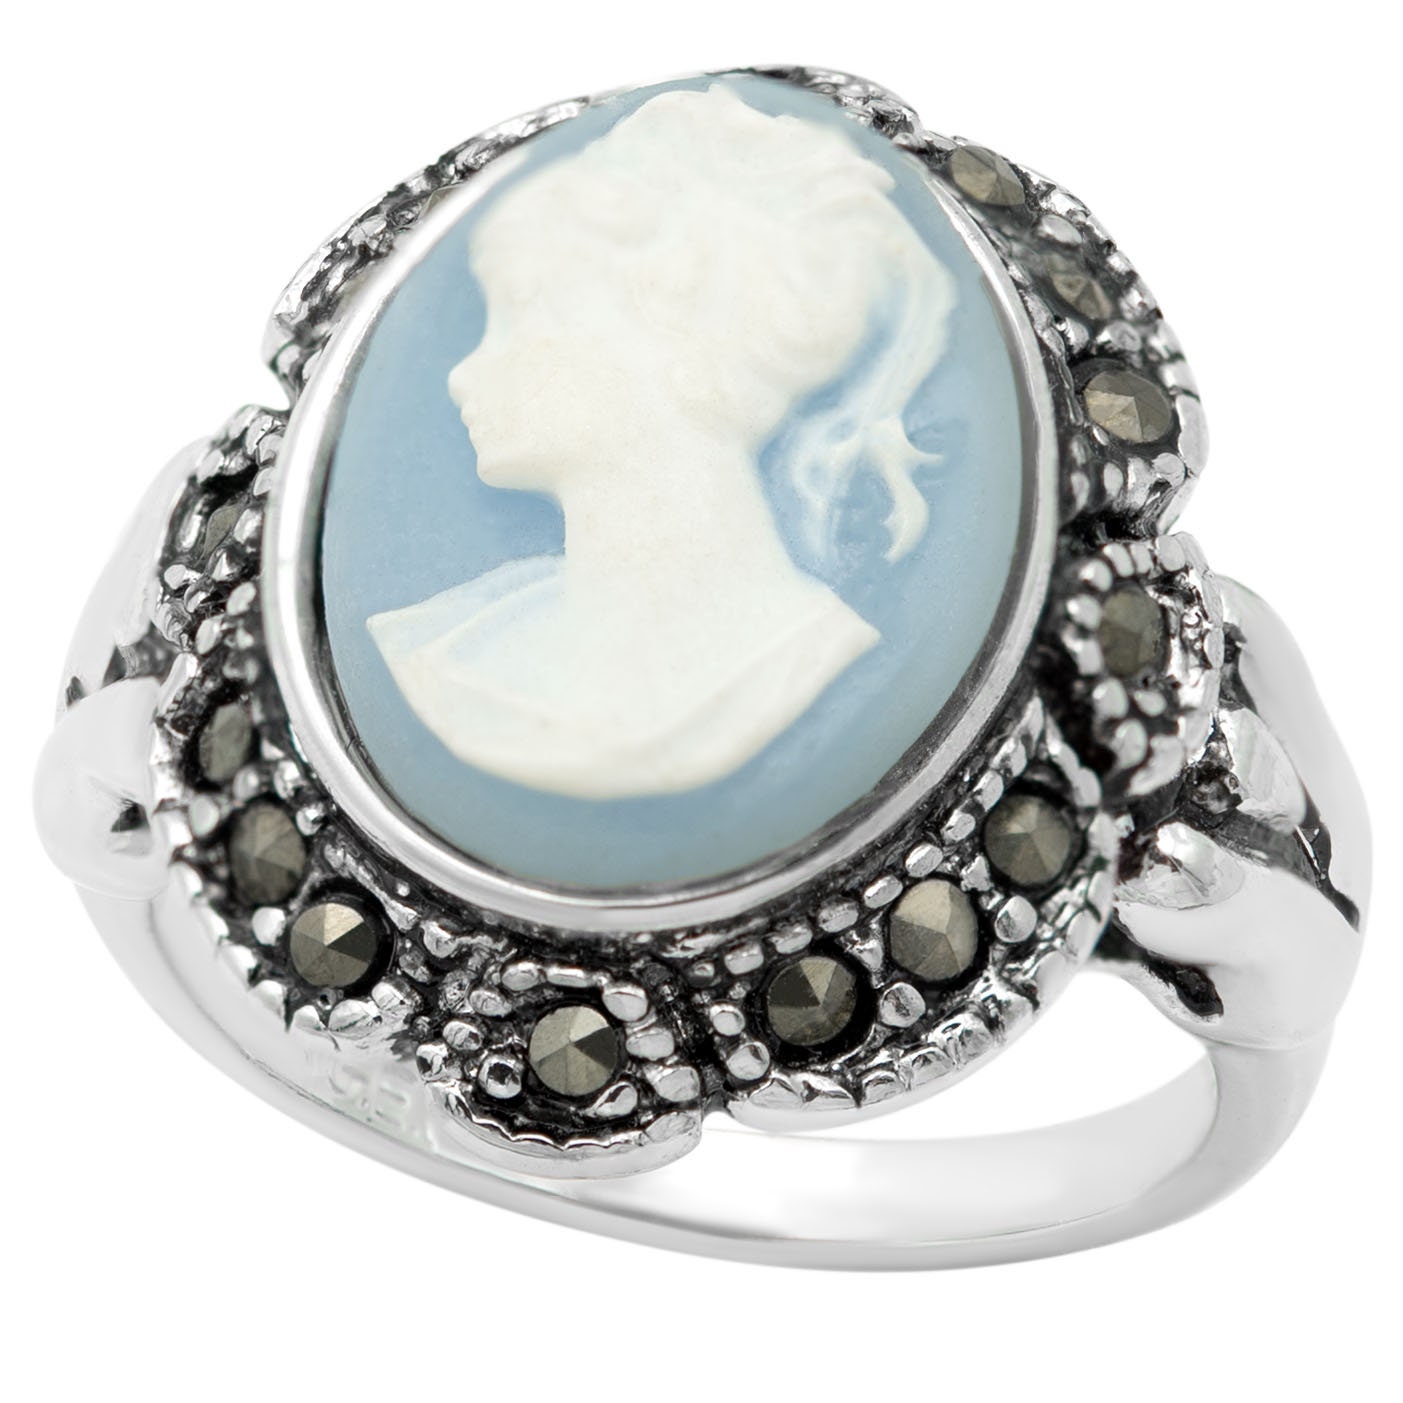 Vintage Ring 1970s 18k Antique White Gold Plated White on Blue Cameo Ring Genuine Marcasite Womans Costume Handmade Jewelry #R1730